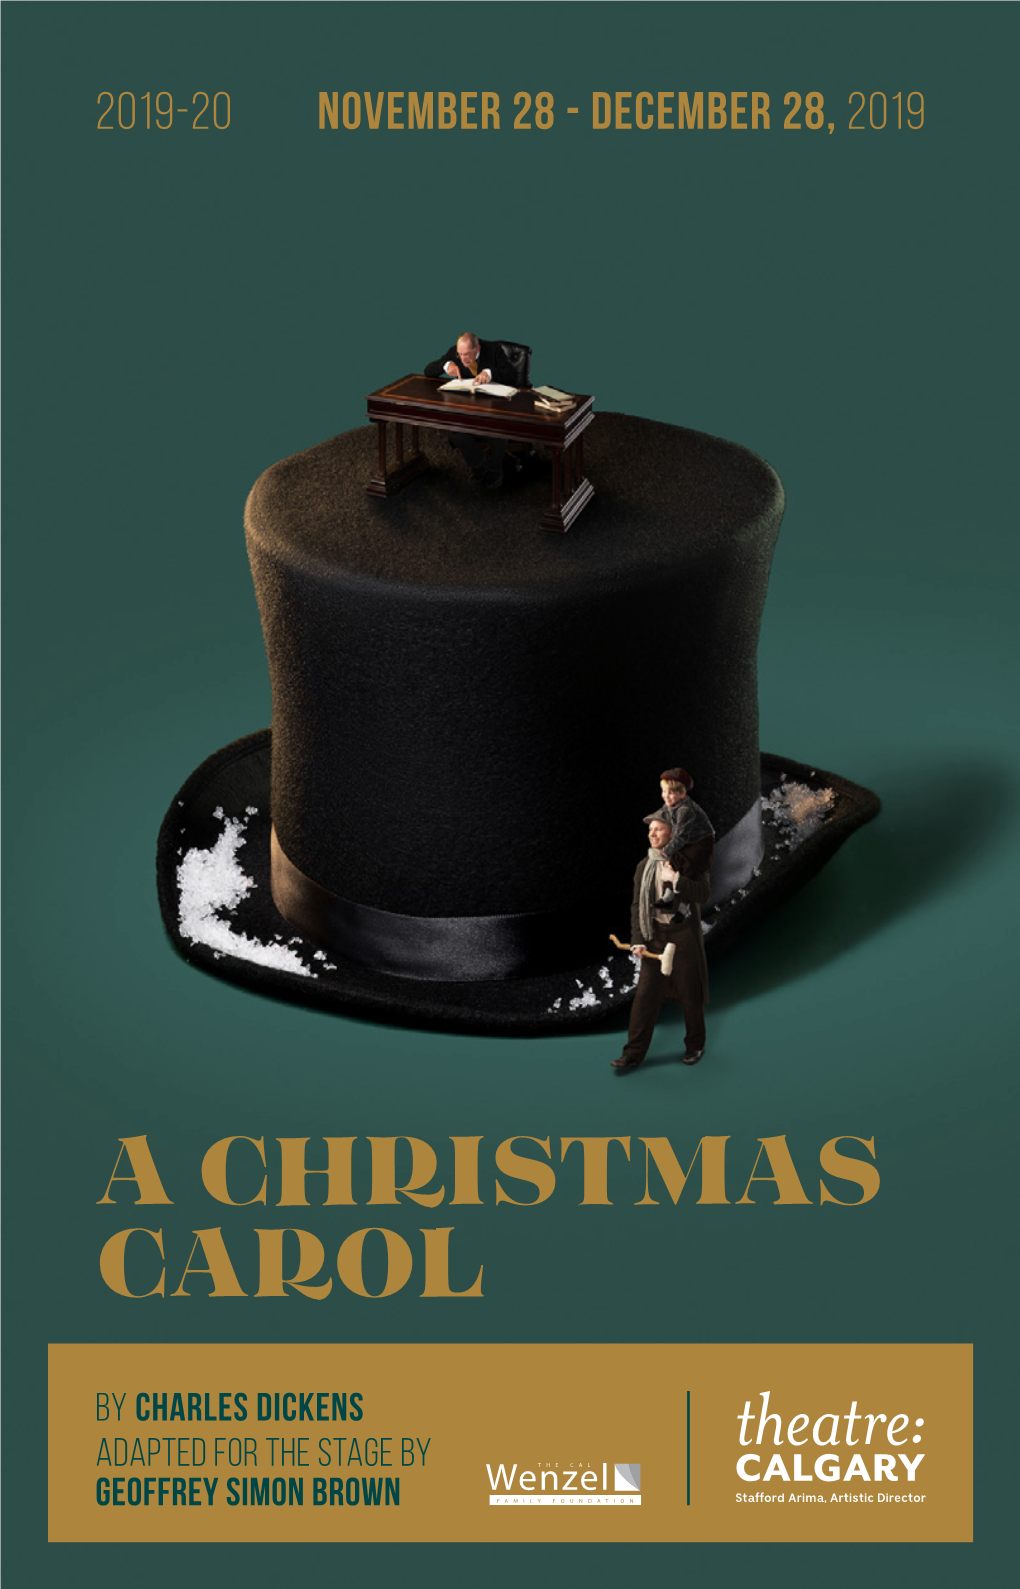 A CHRISTMAS CAROL by Charles Dickens Adapted for the Stage by Geoffrey Simon Brown Embrace the Glow We’Re Thrilled to Share Tonight with You – Enjoy the Show